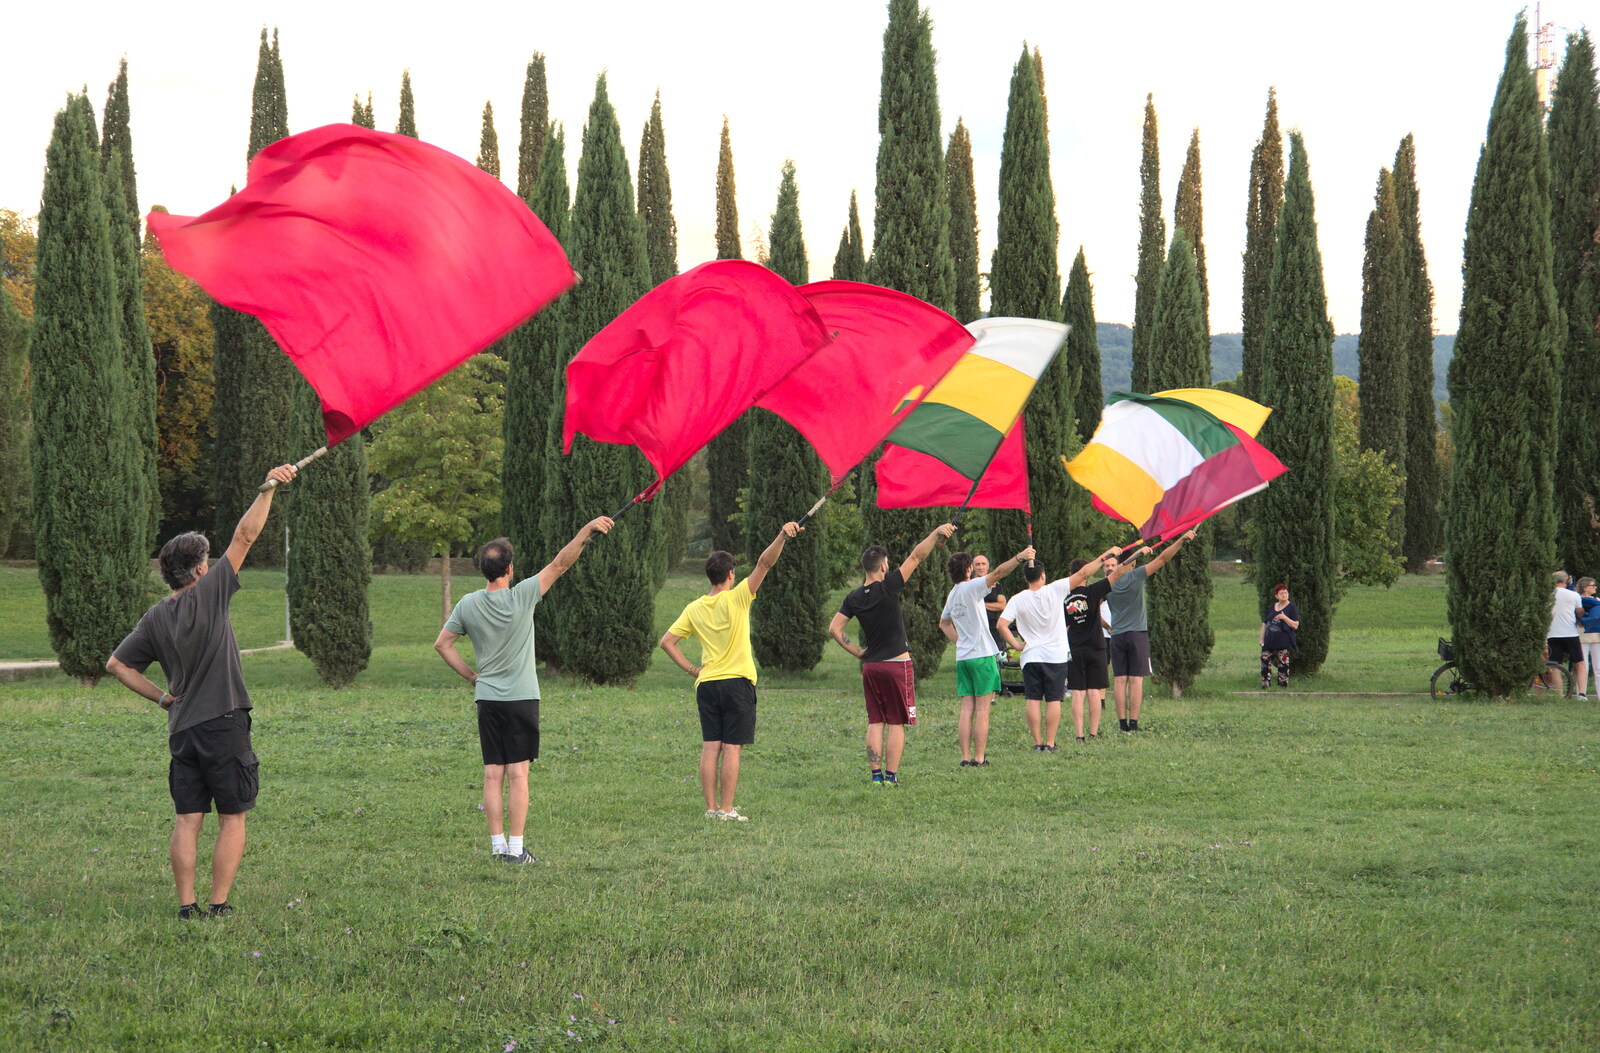 A Day by the Pool and a Festival Rehearsal, Arezzo, Italy - 3rd September 2022: There's more flag-waving practice